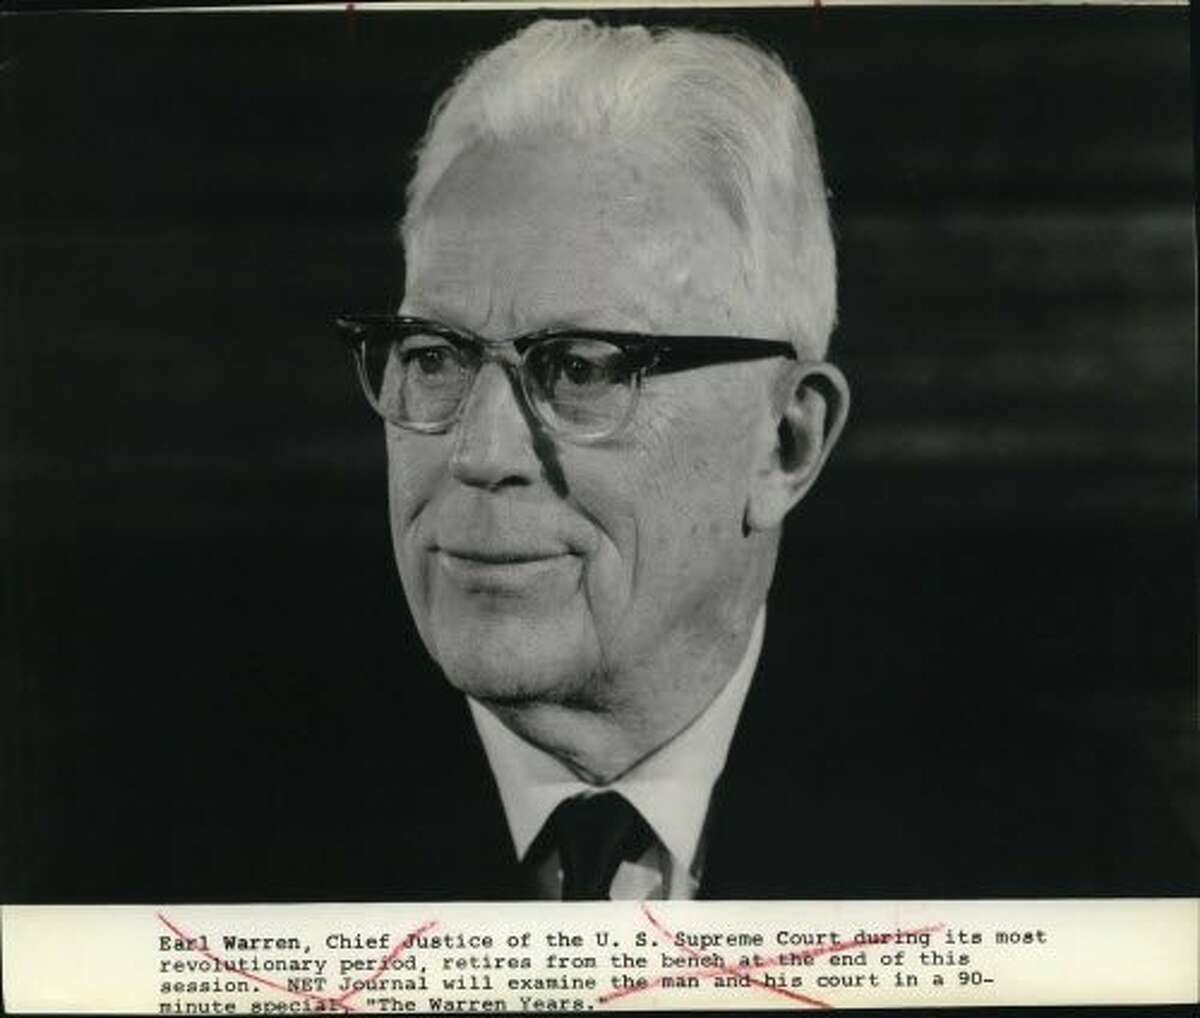 California officials, including Earl Warren, once opposed birthright